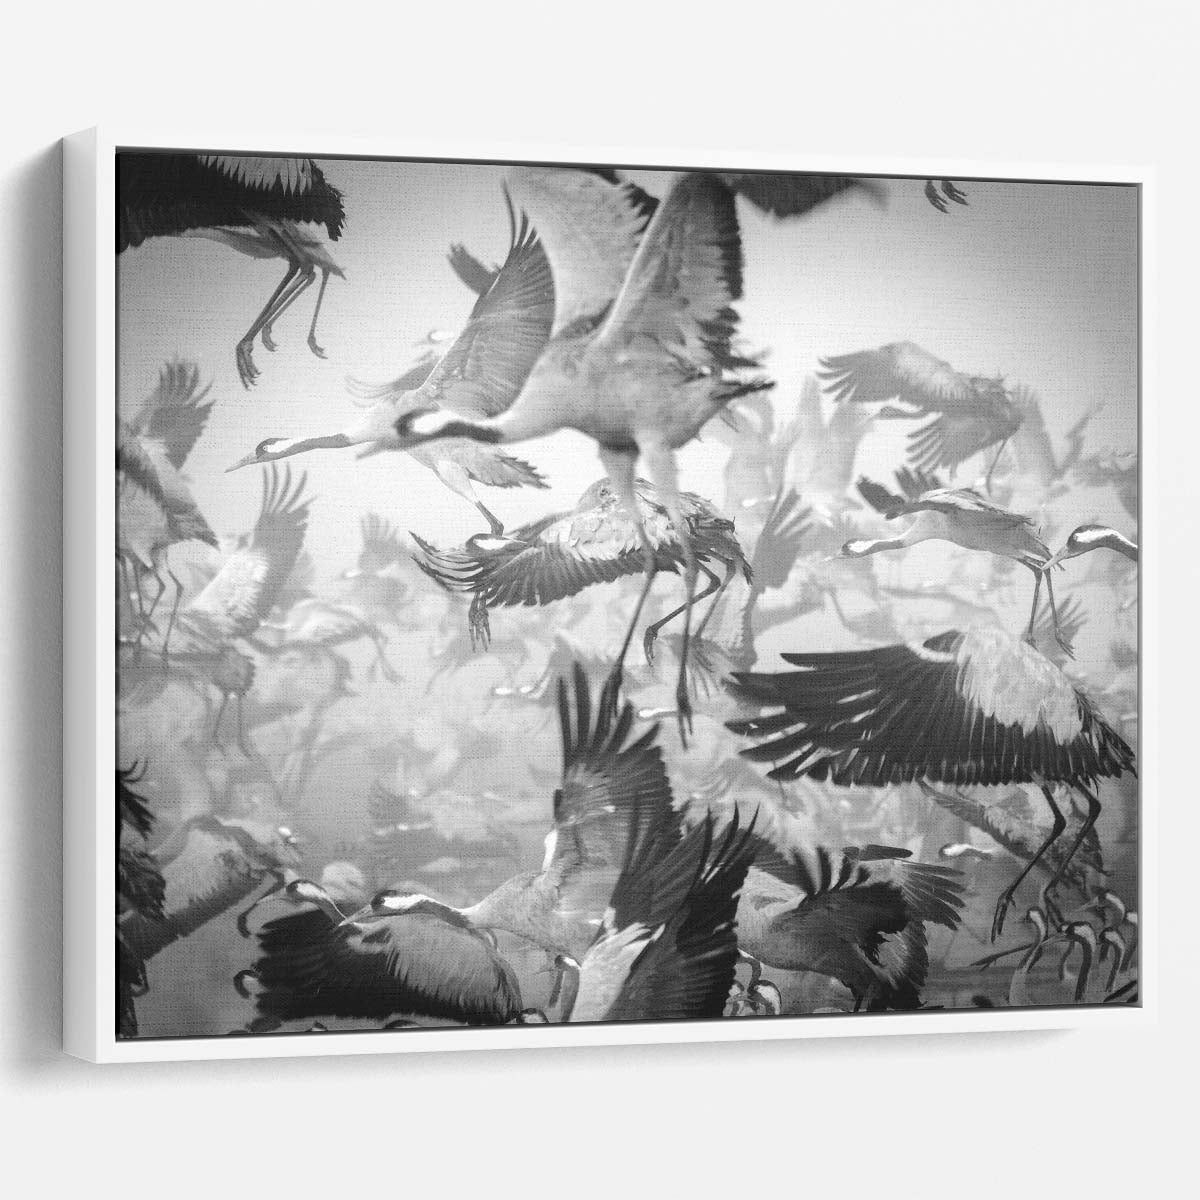 Misty Crane Migration Over Chula Lake Wall Art by Luxuriance Designs. Made in USA.